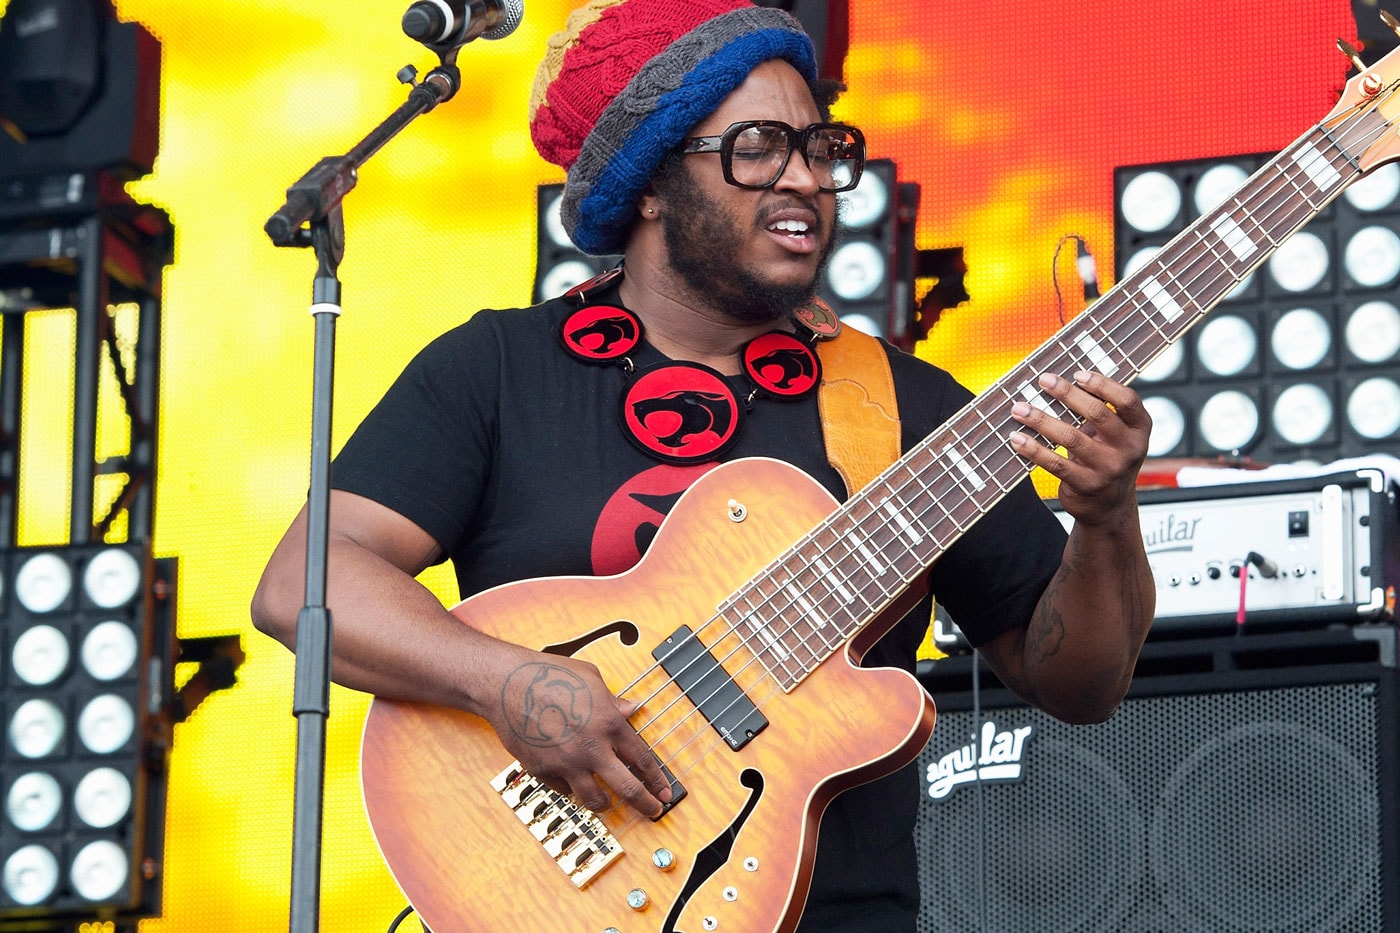 Thundercat Performs "Them Changes" on 'Why? with Hannibal Buress'